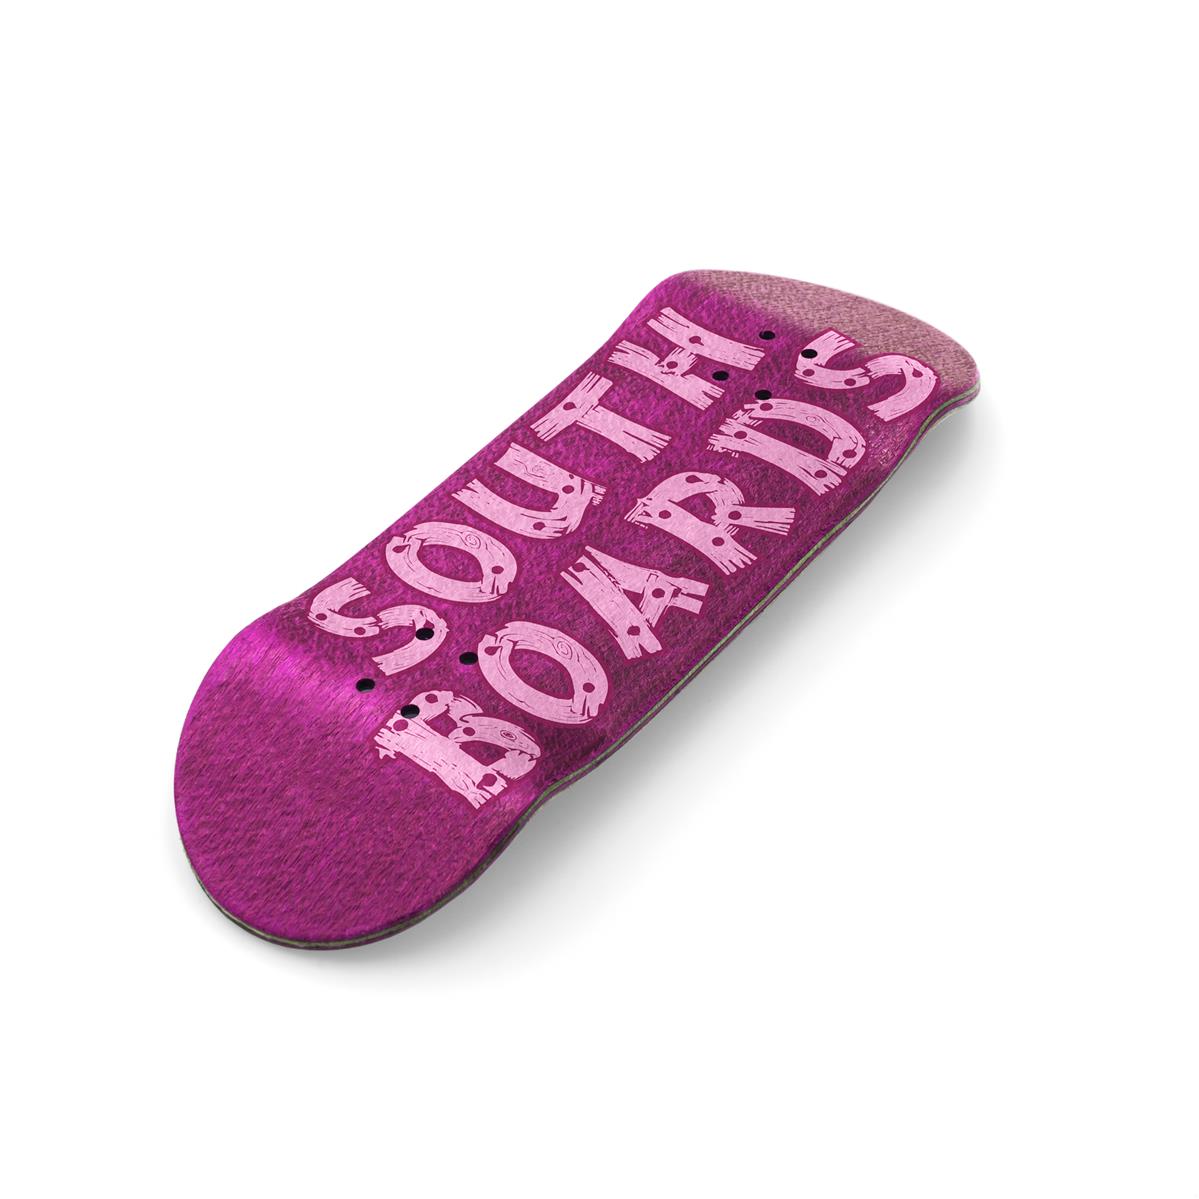 Southboard Deck Pink